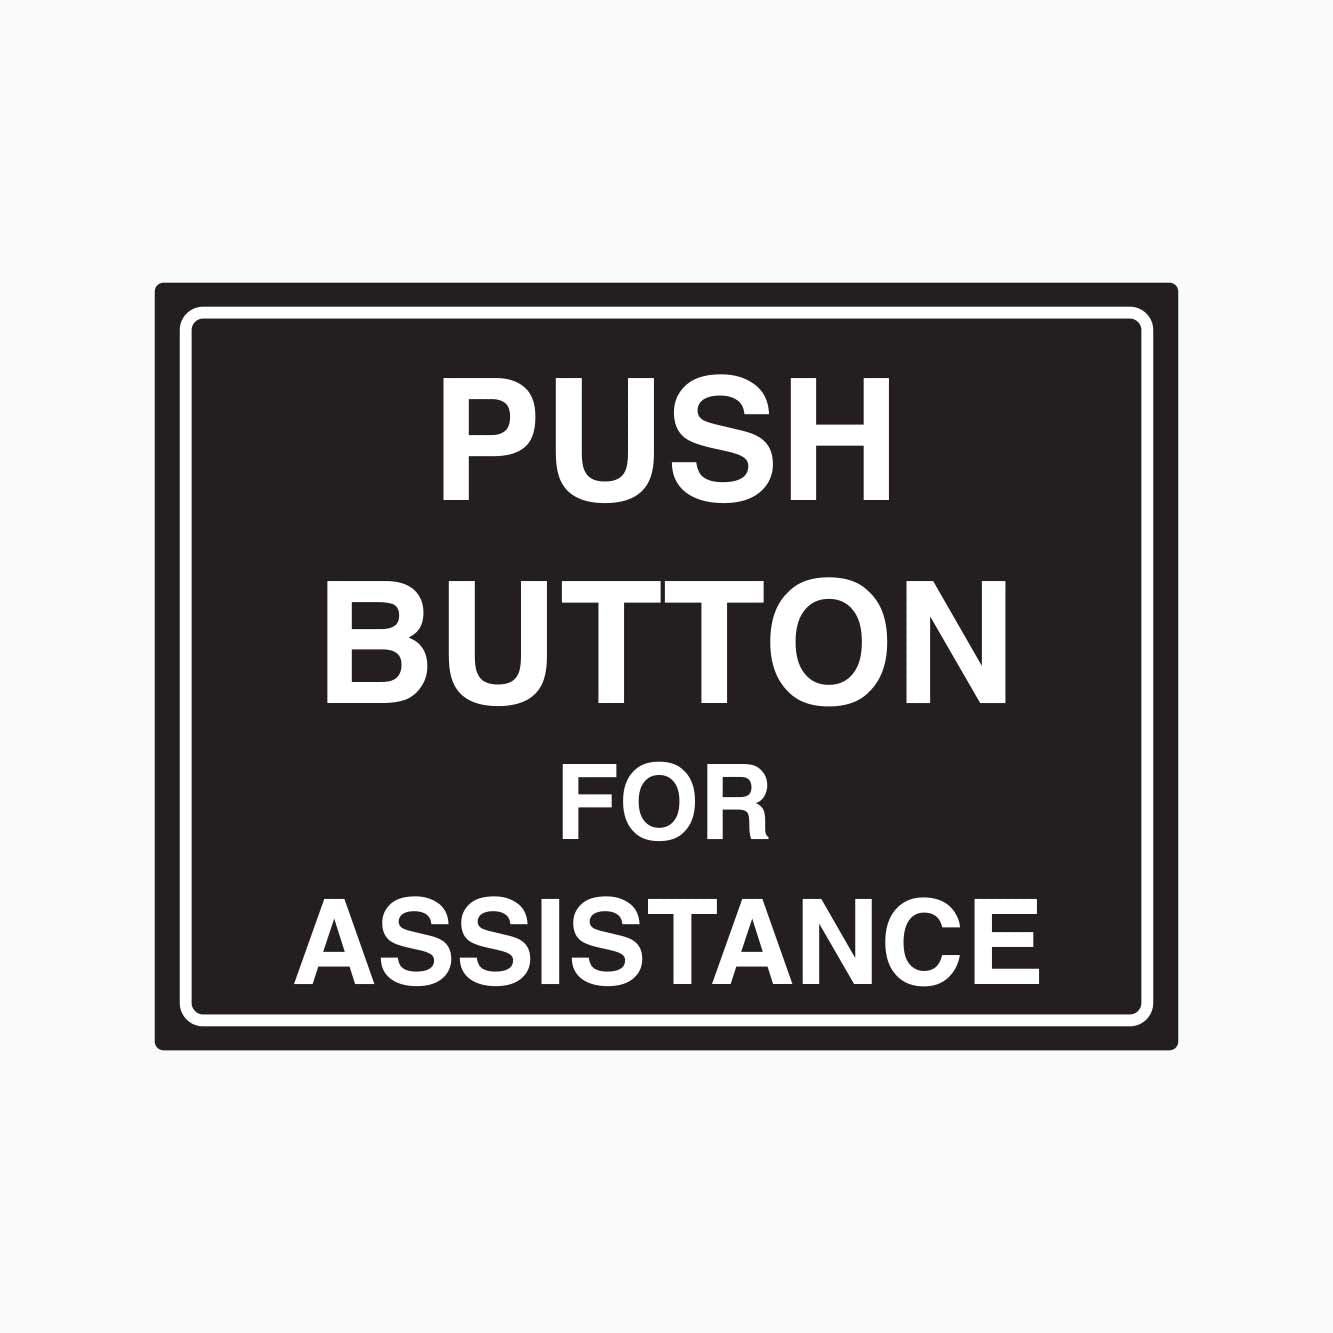 PUSH BUTTON FOR ASSISTANCE SIGN - GET SIGNS